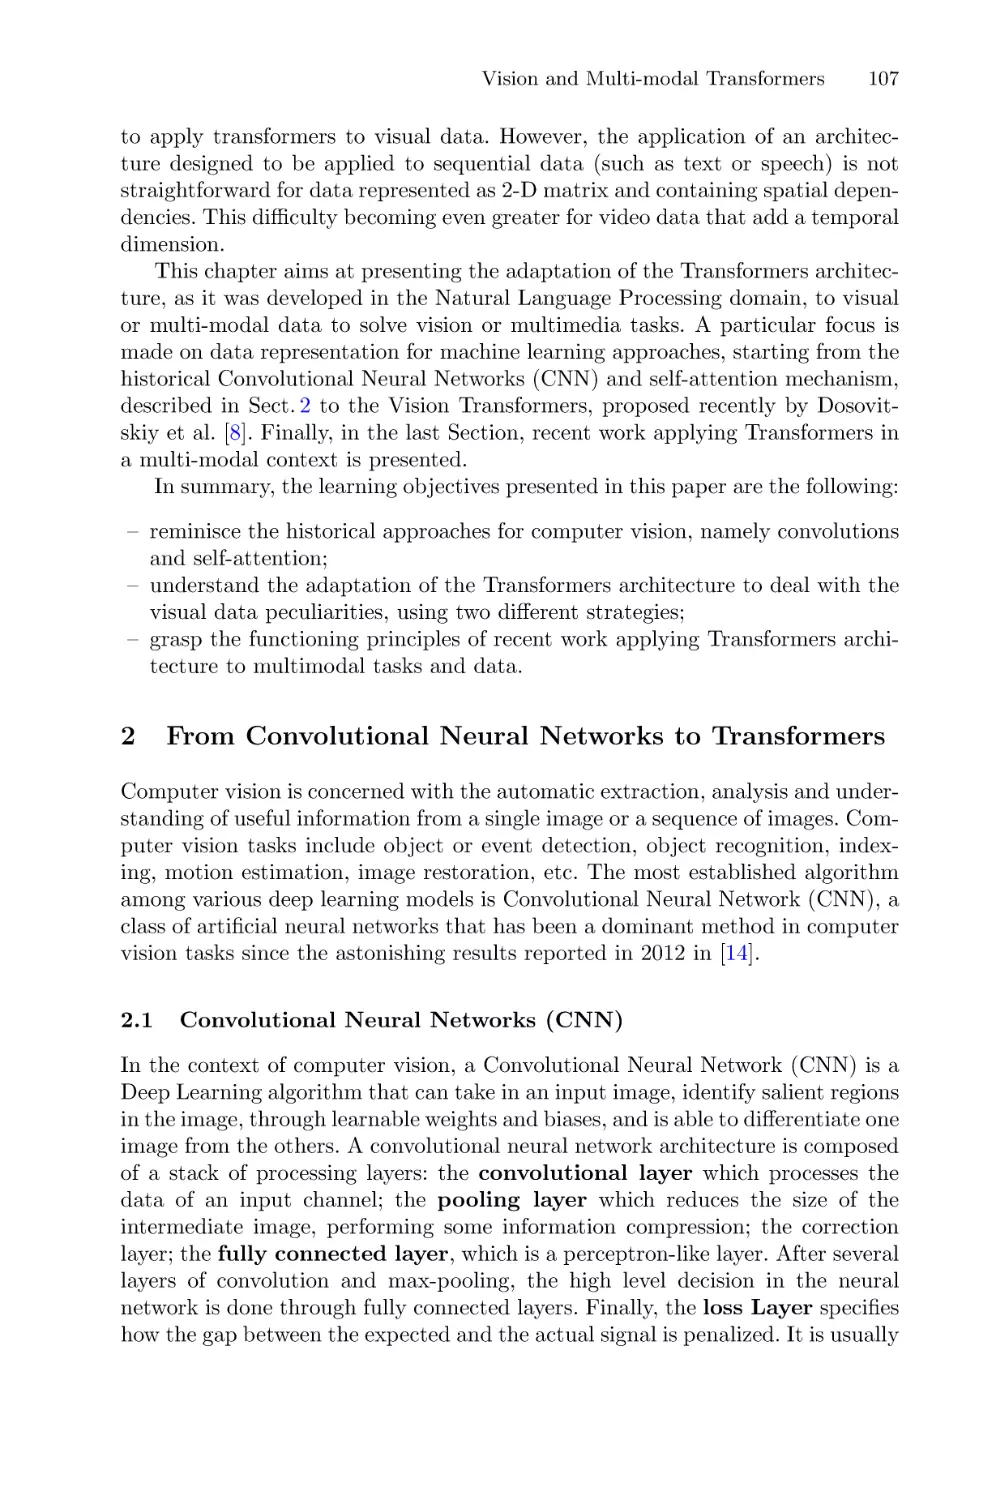 2 From Convolutional Neural Networks to Transformers
2.1 Convolutional Neural Networks (CNN)